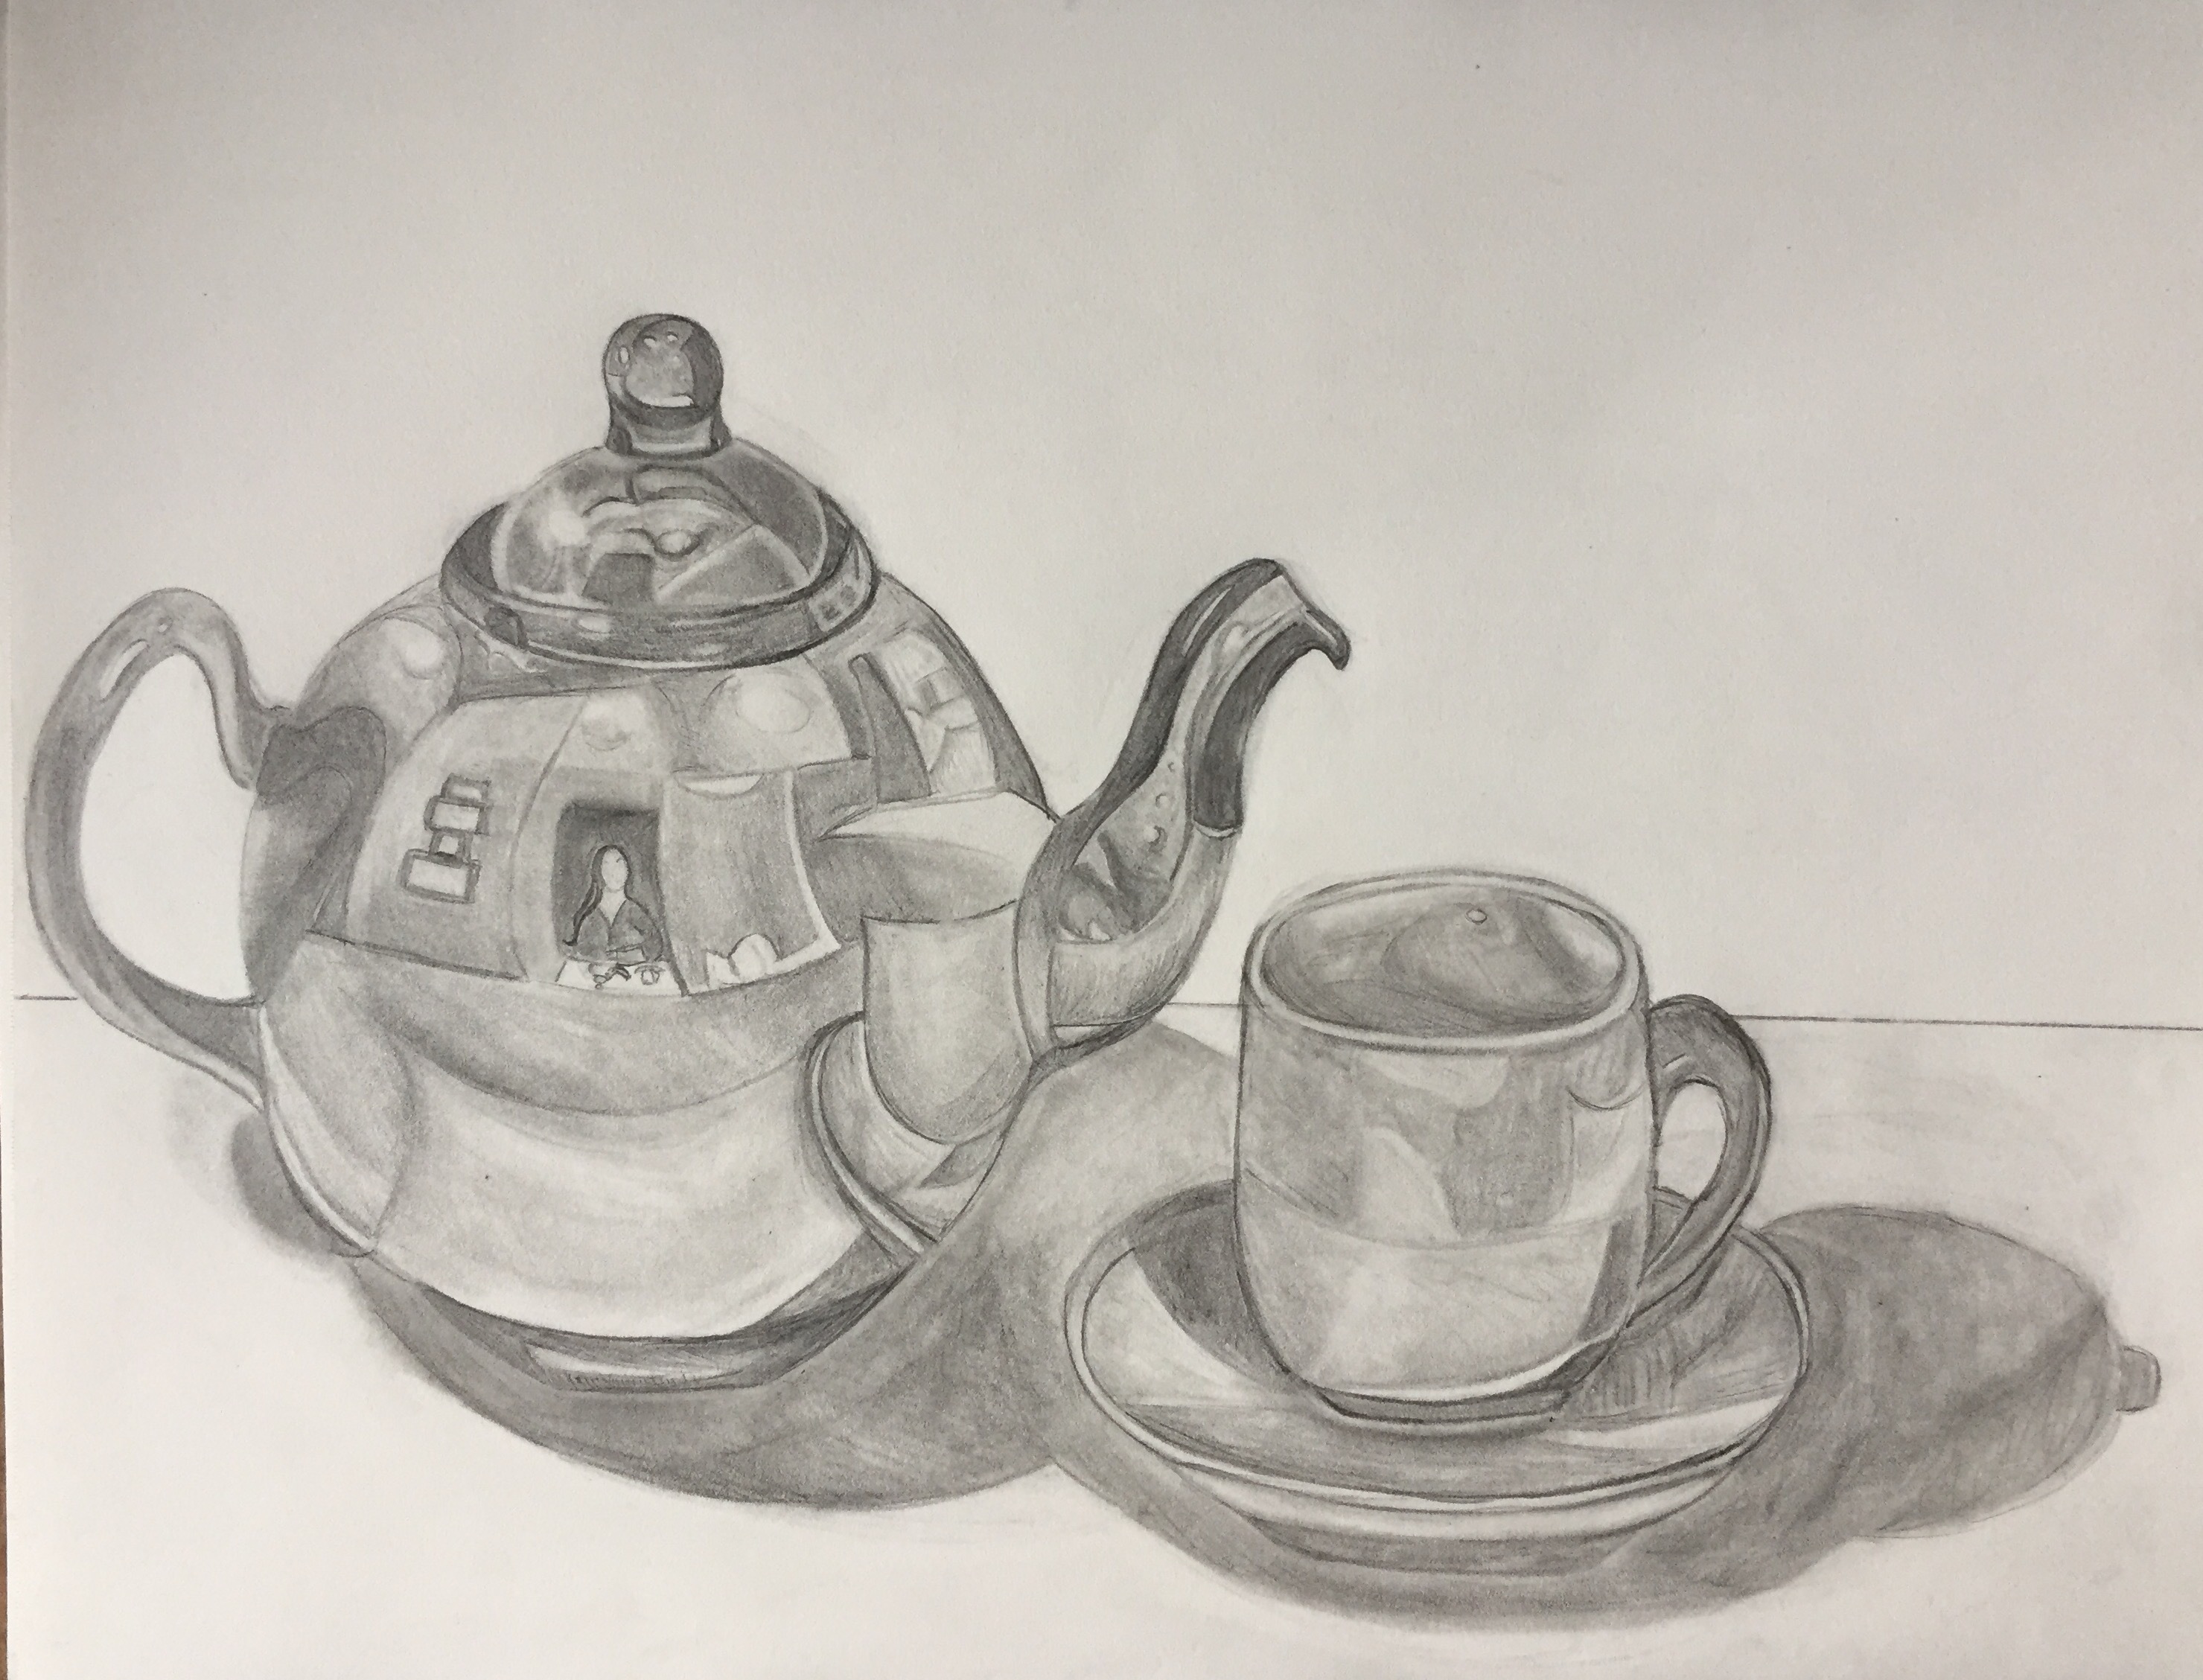 View Image Details Still Life with TeaPot by Mia